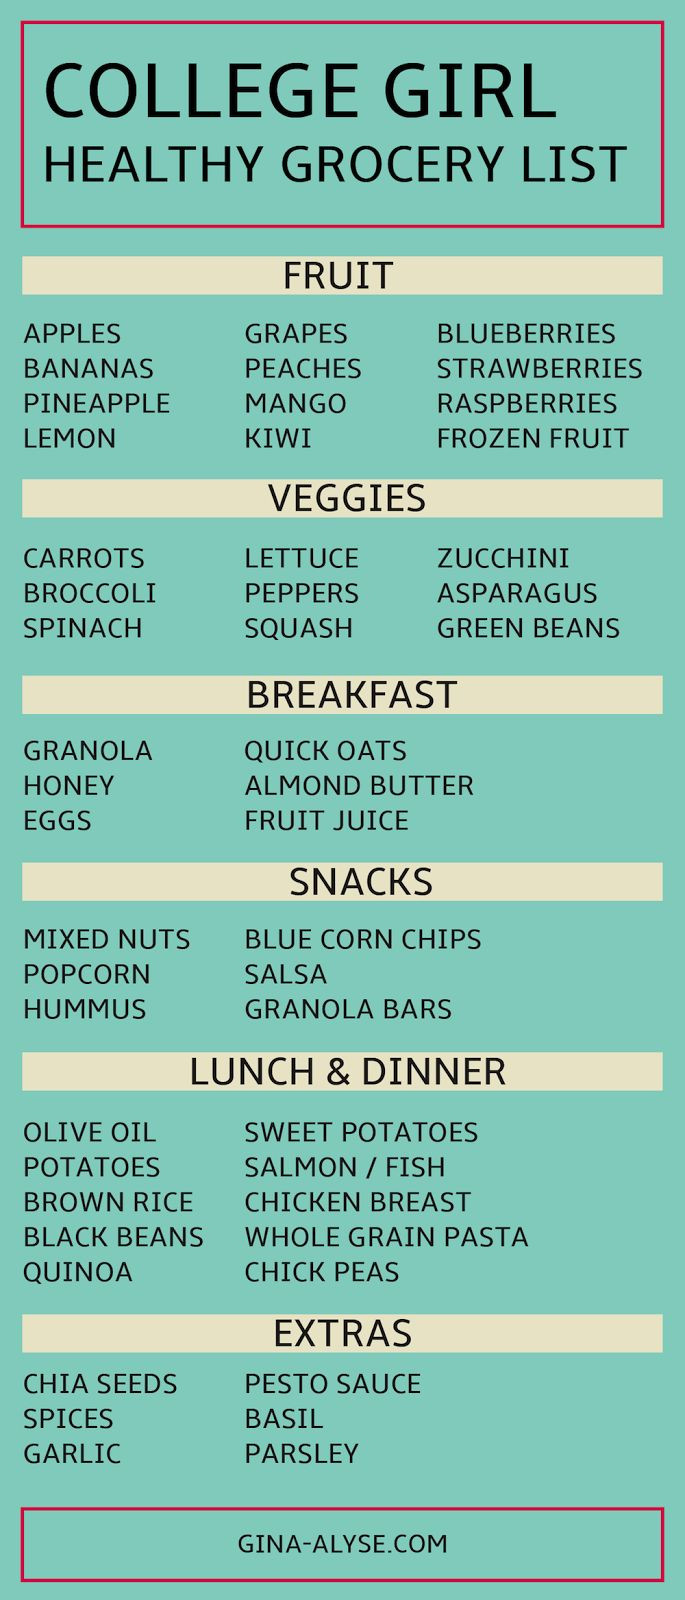 List Of Healthy Snacks For College Students
 Real College Student of Atlanta Healthy grocery shopping